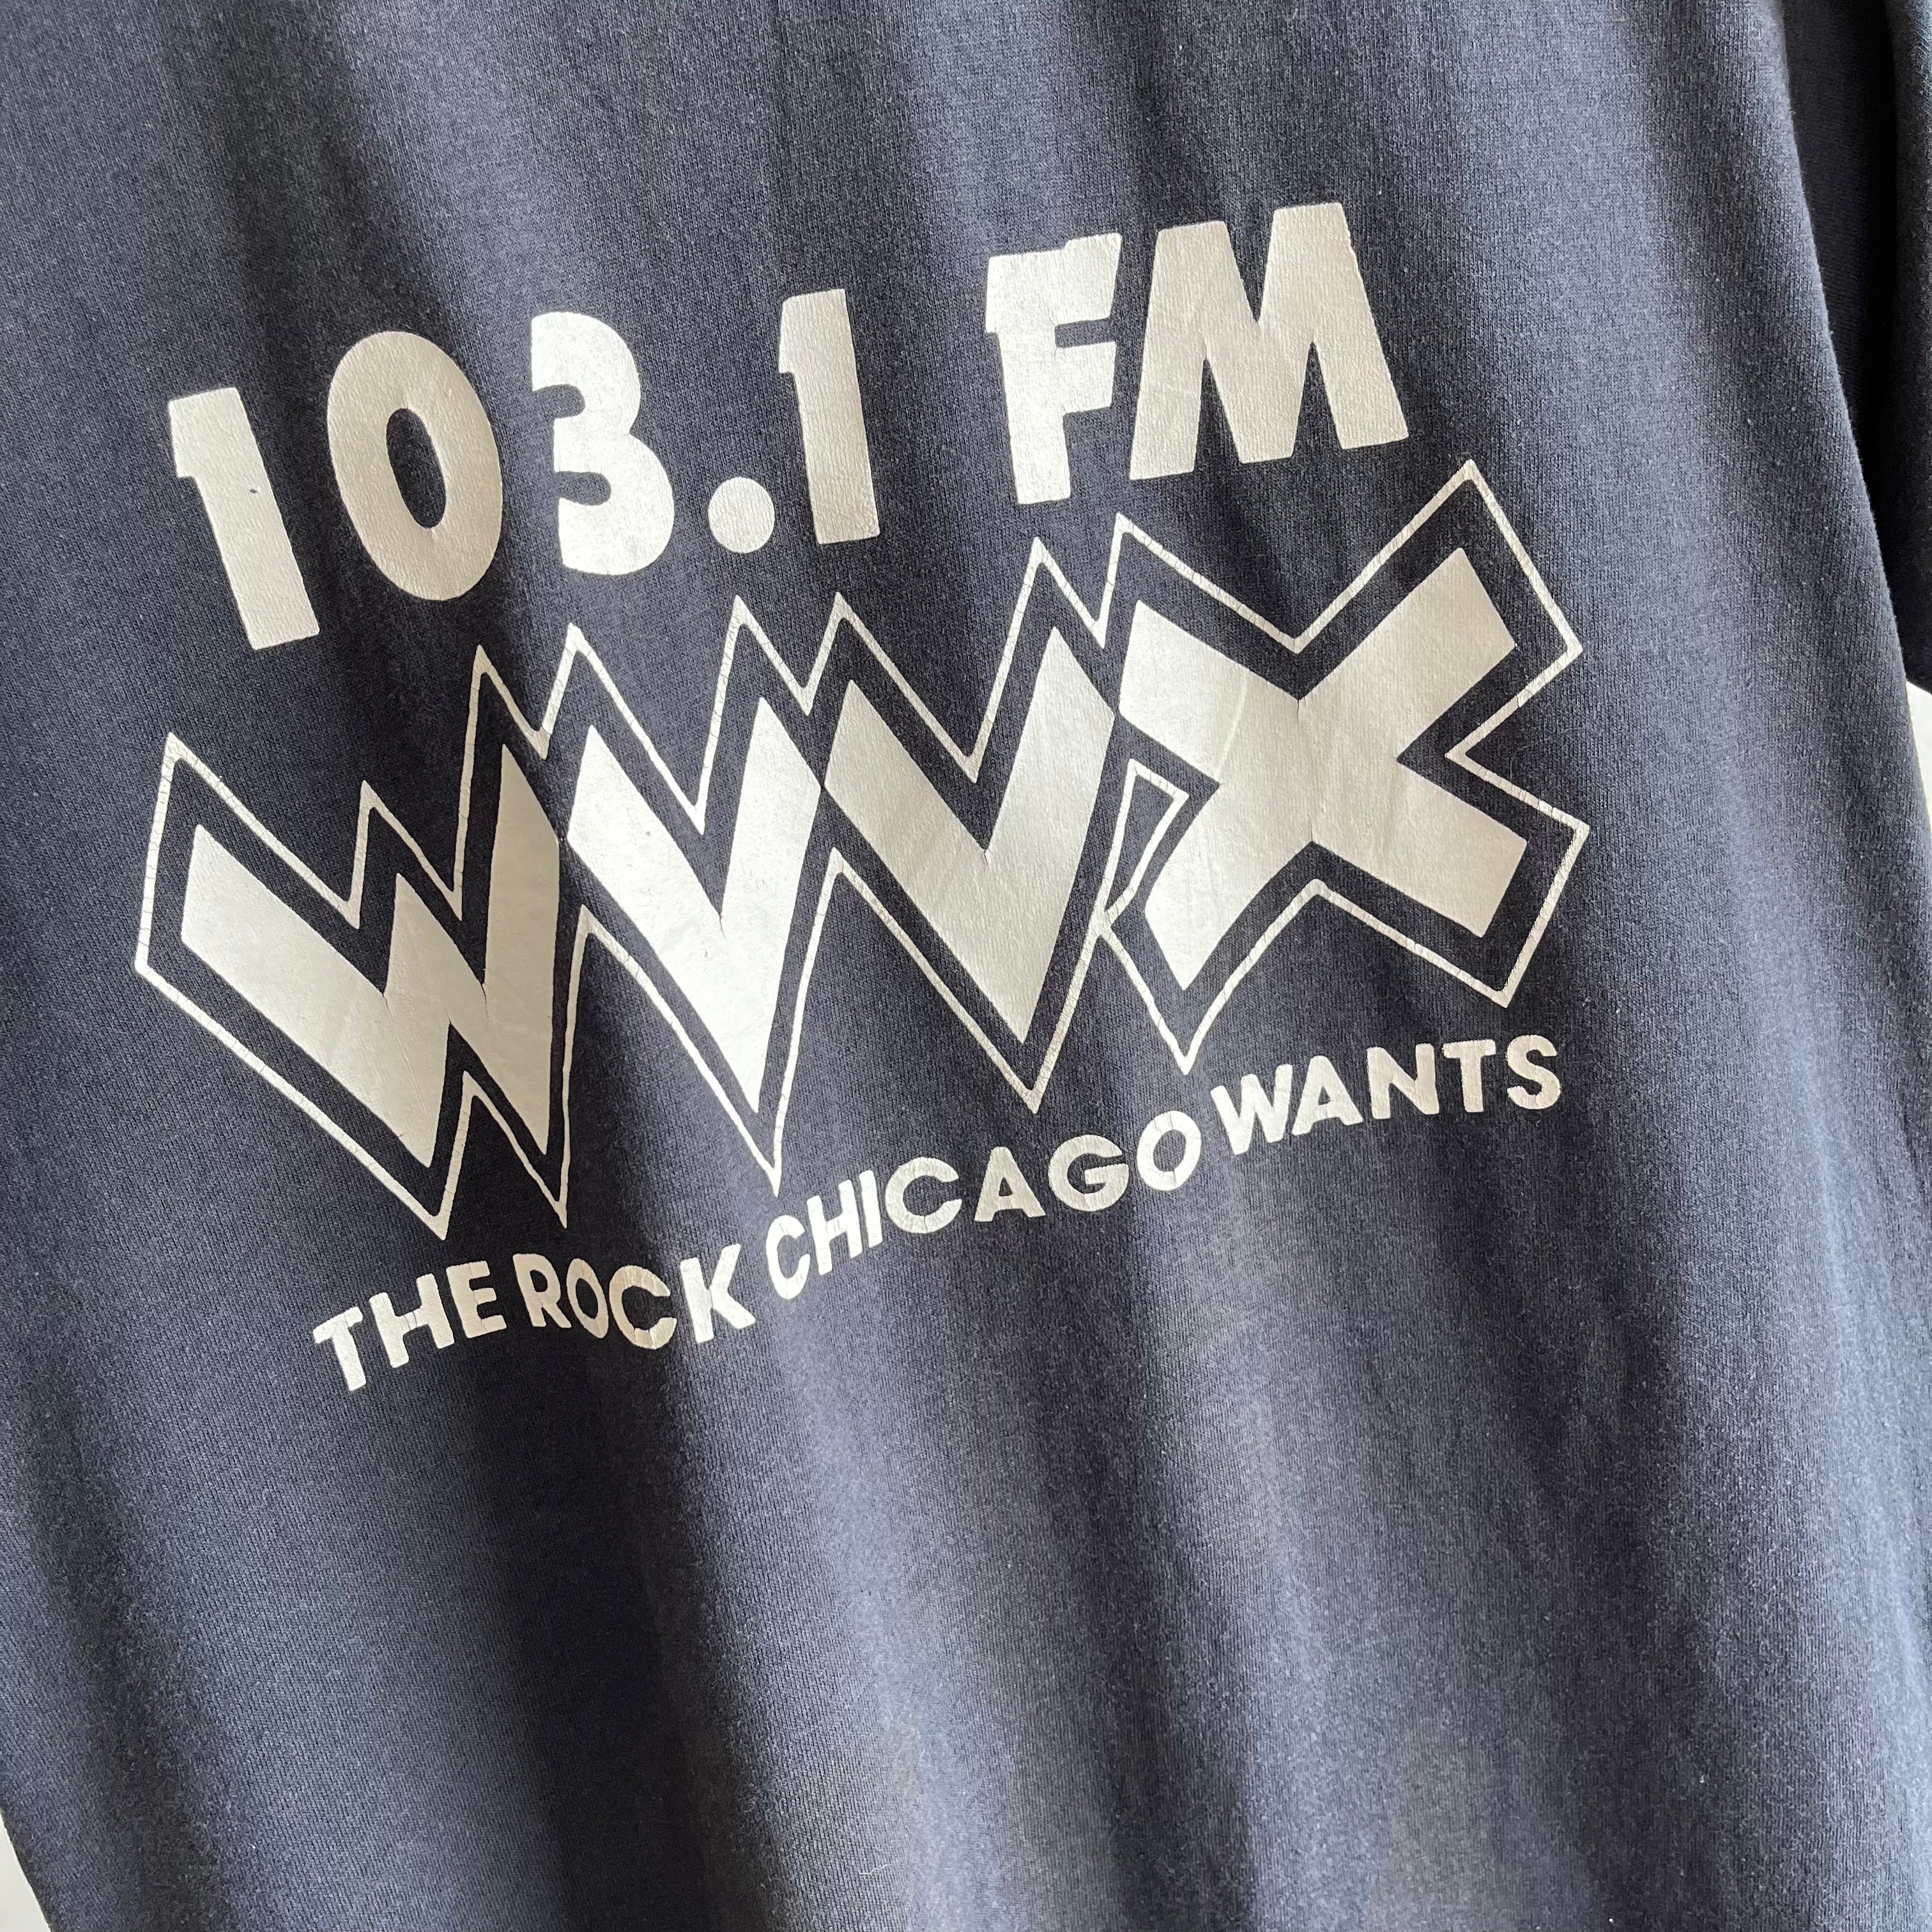 1980s 103.1 WVVX The ROck Chicago Wants T-Shirt